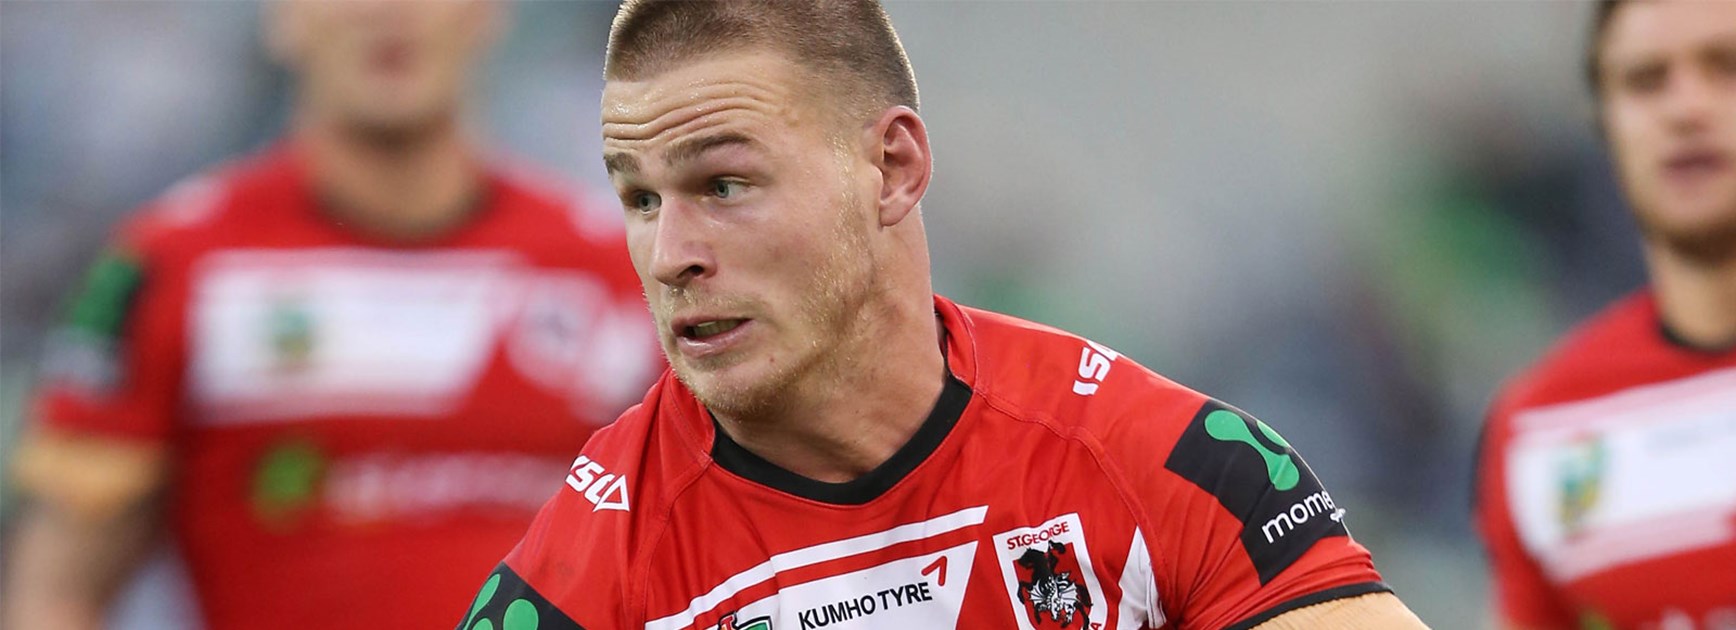 Euan Aitken's strong performance on debut was one of the keys to the Dragons' comeback win over Canberra on Saturday.